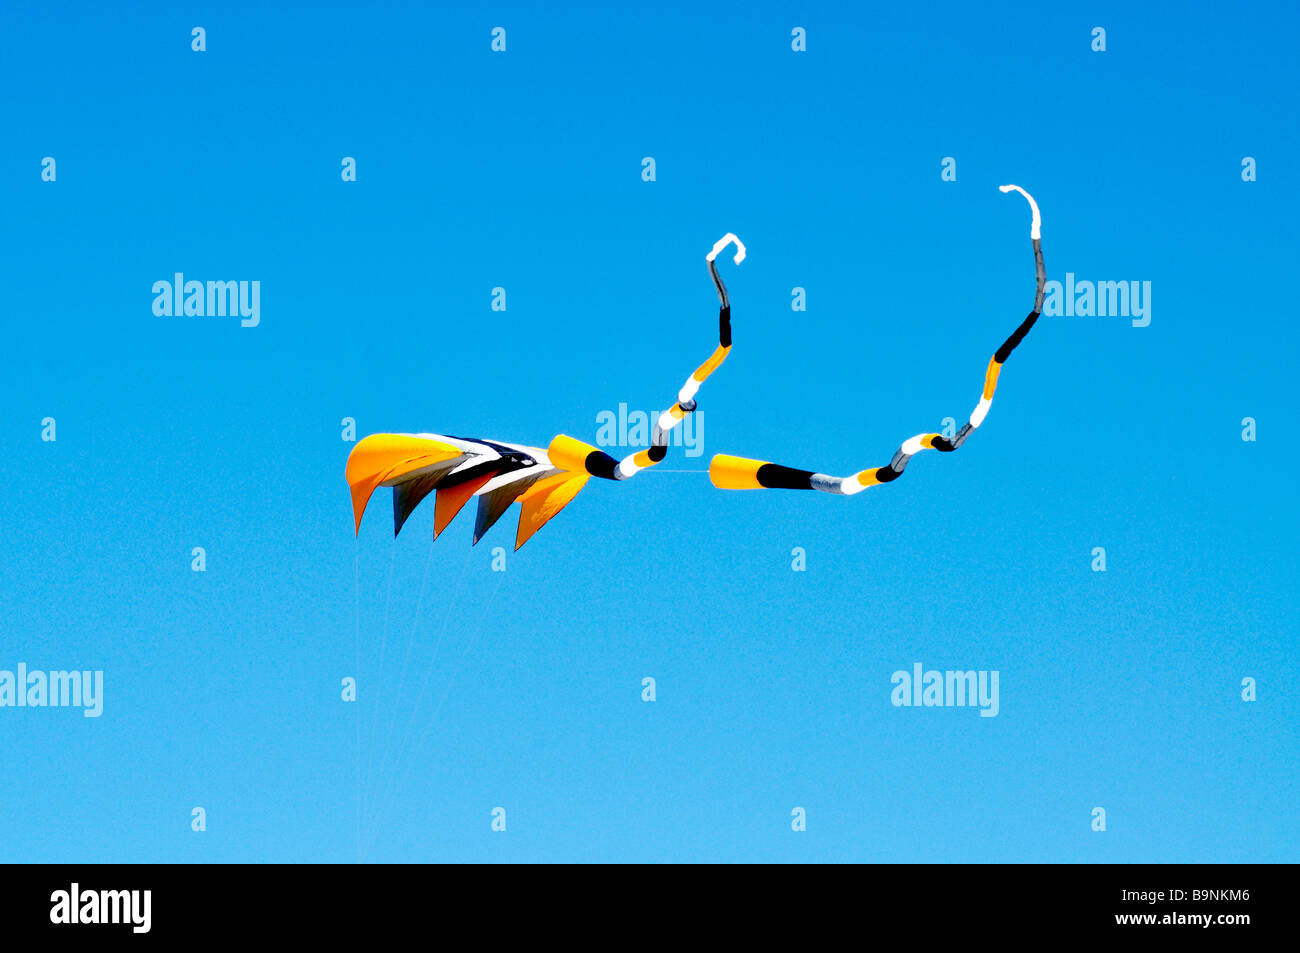 Large striped [sled kite] with streamers flying against clear blue sky Stock Photo